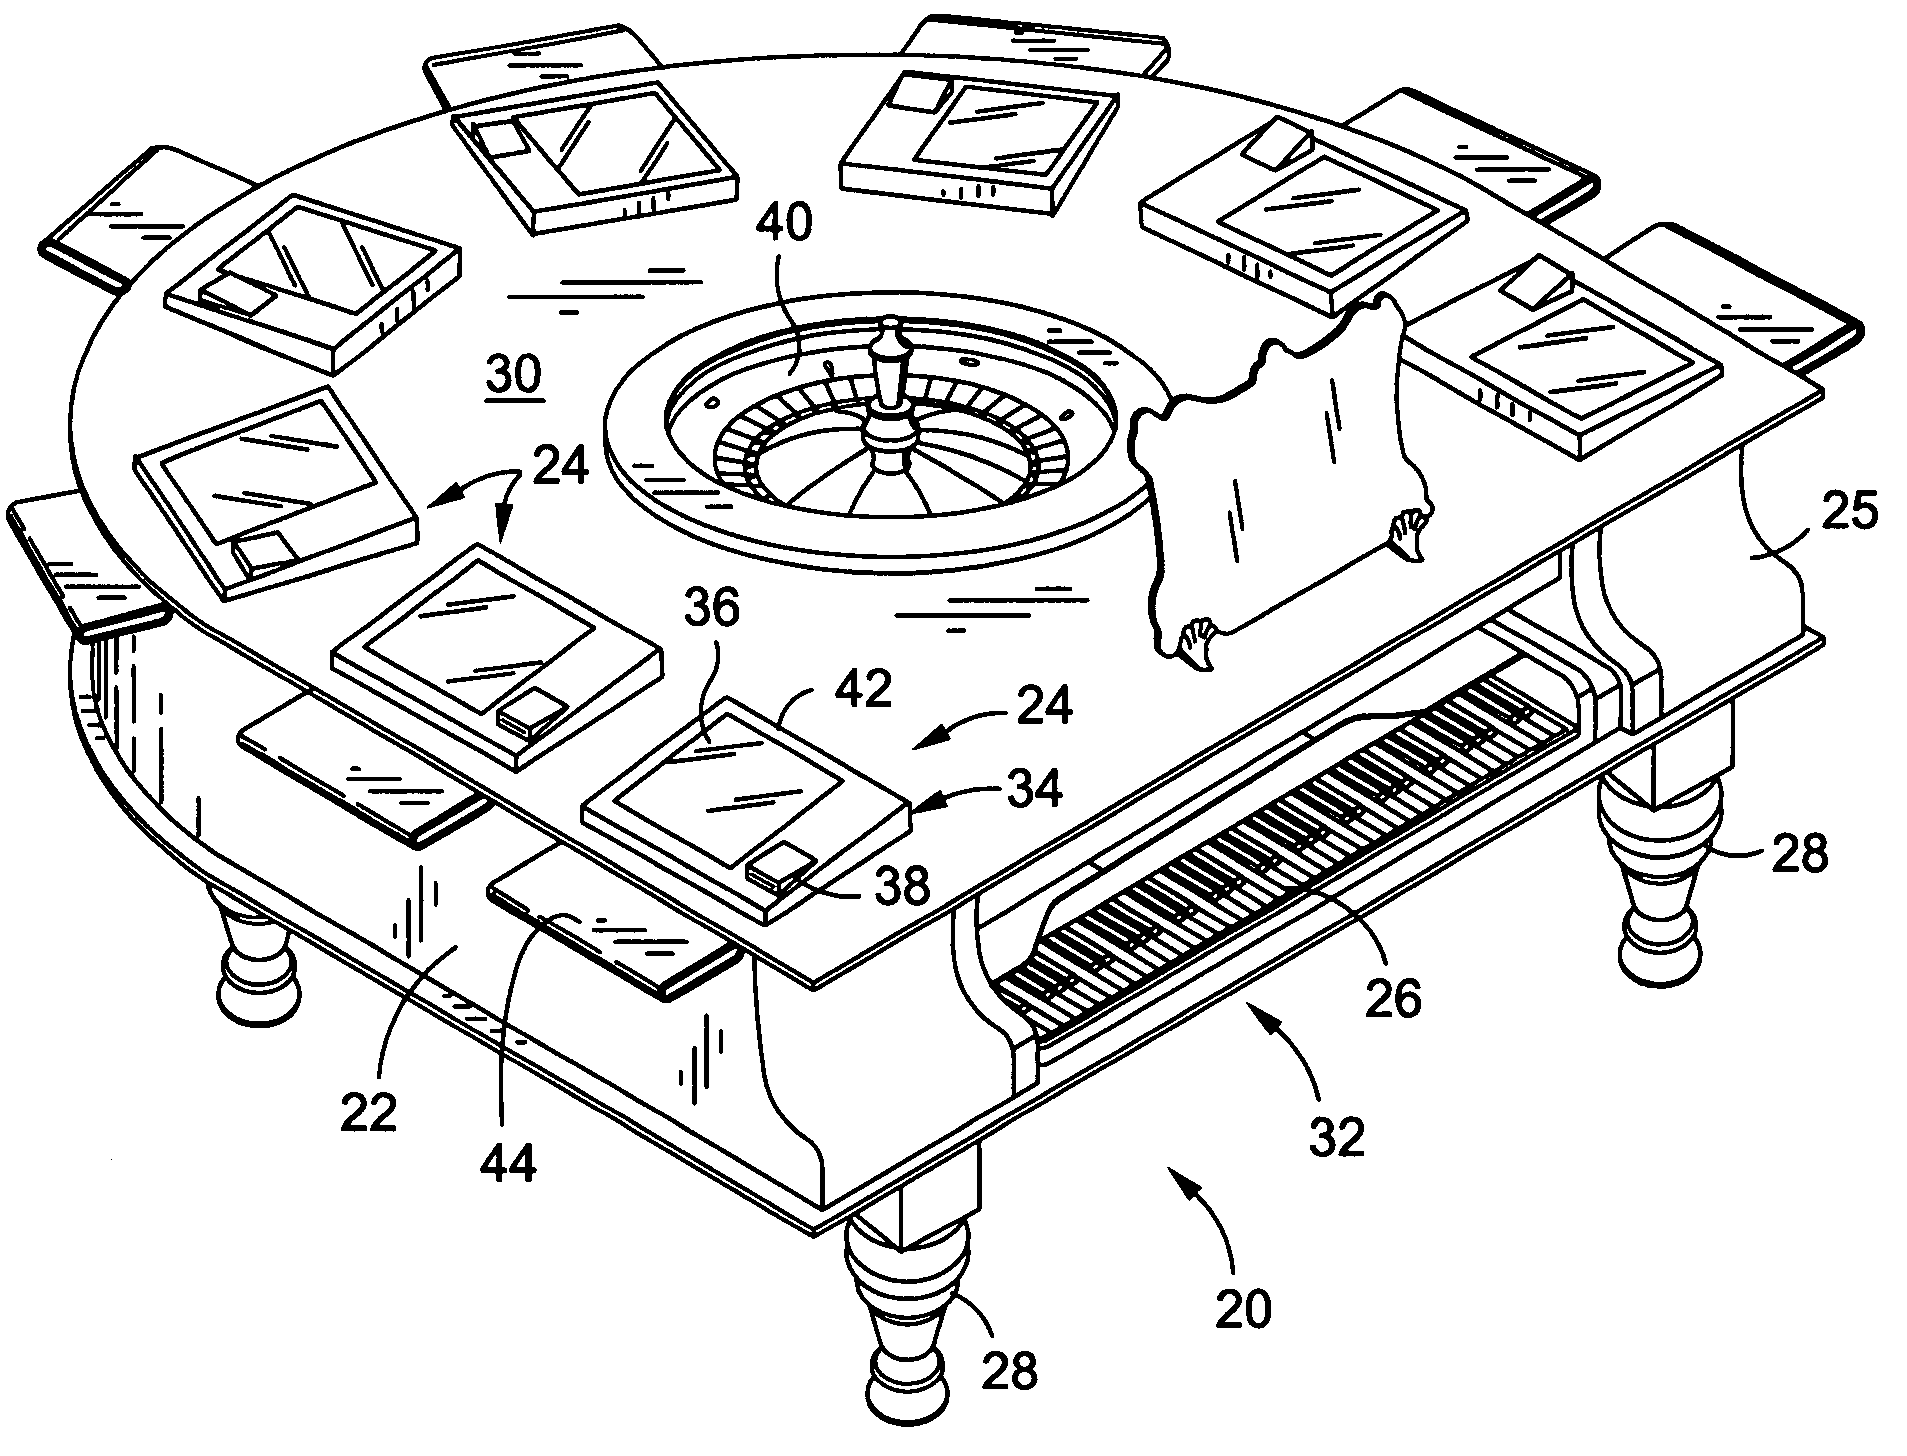 Combined musical instrument and gaming device